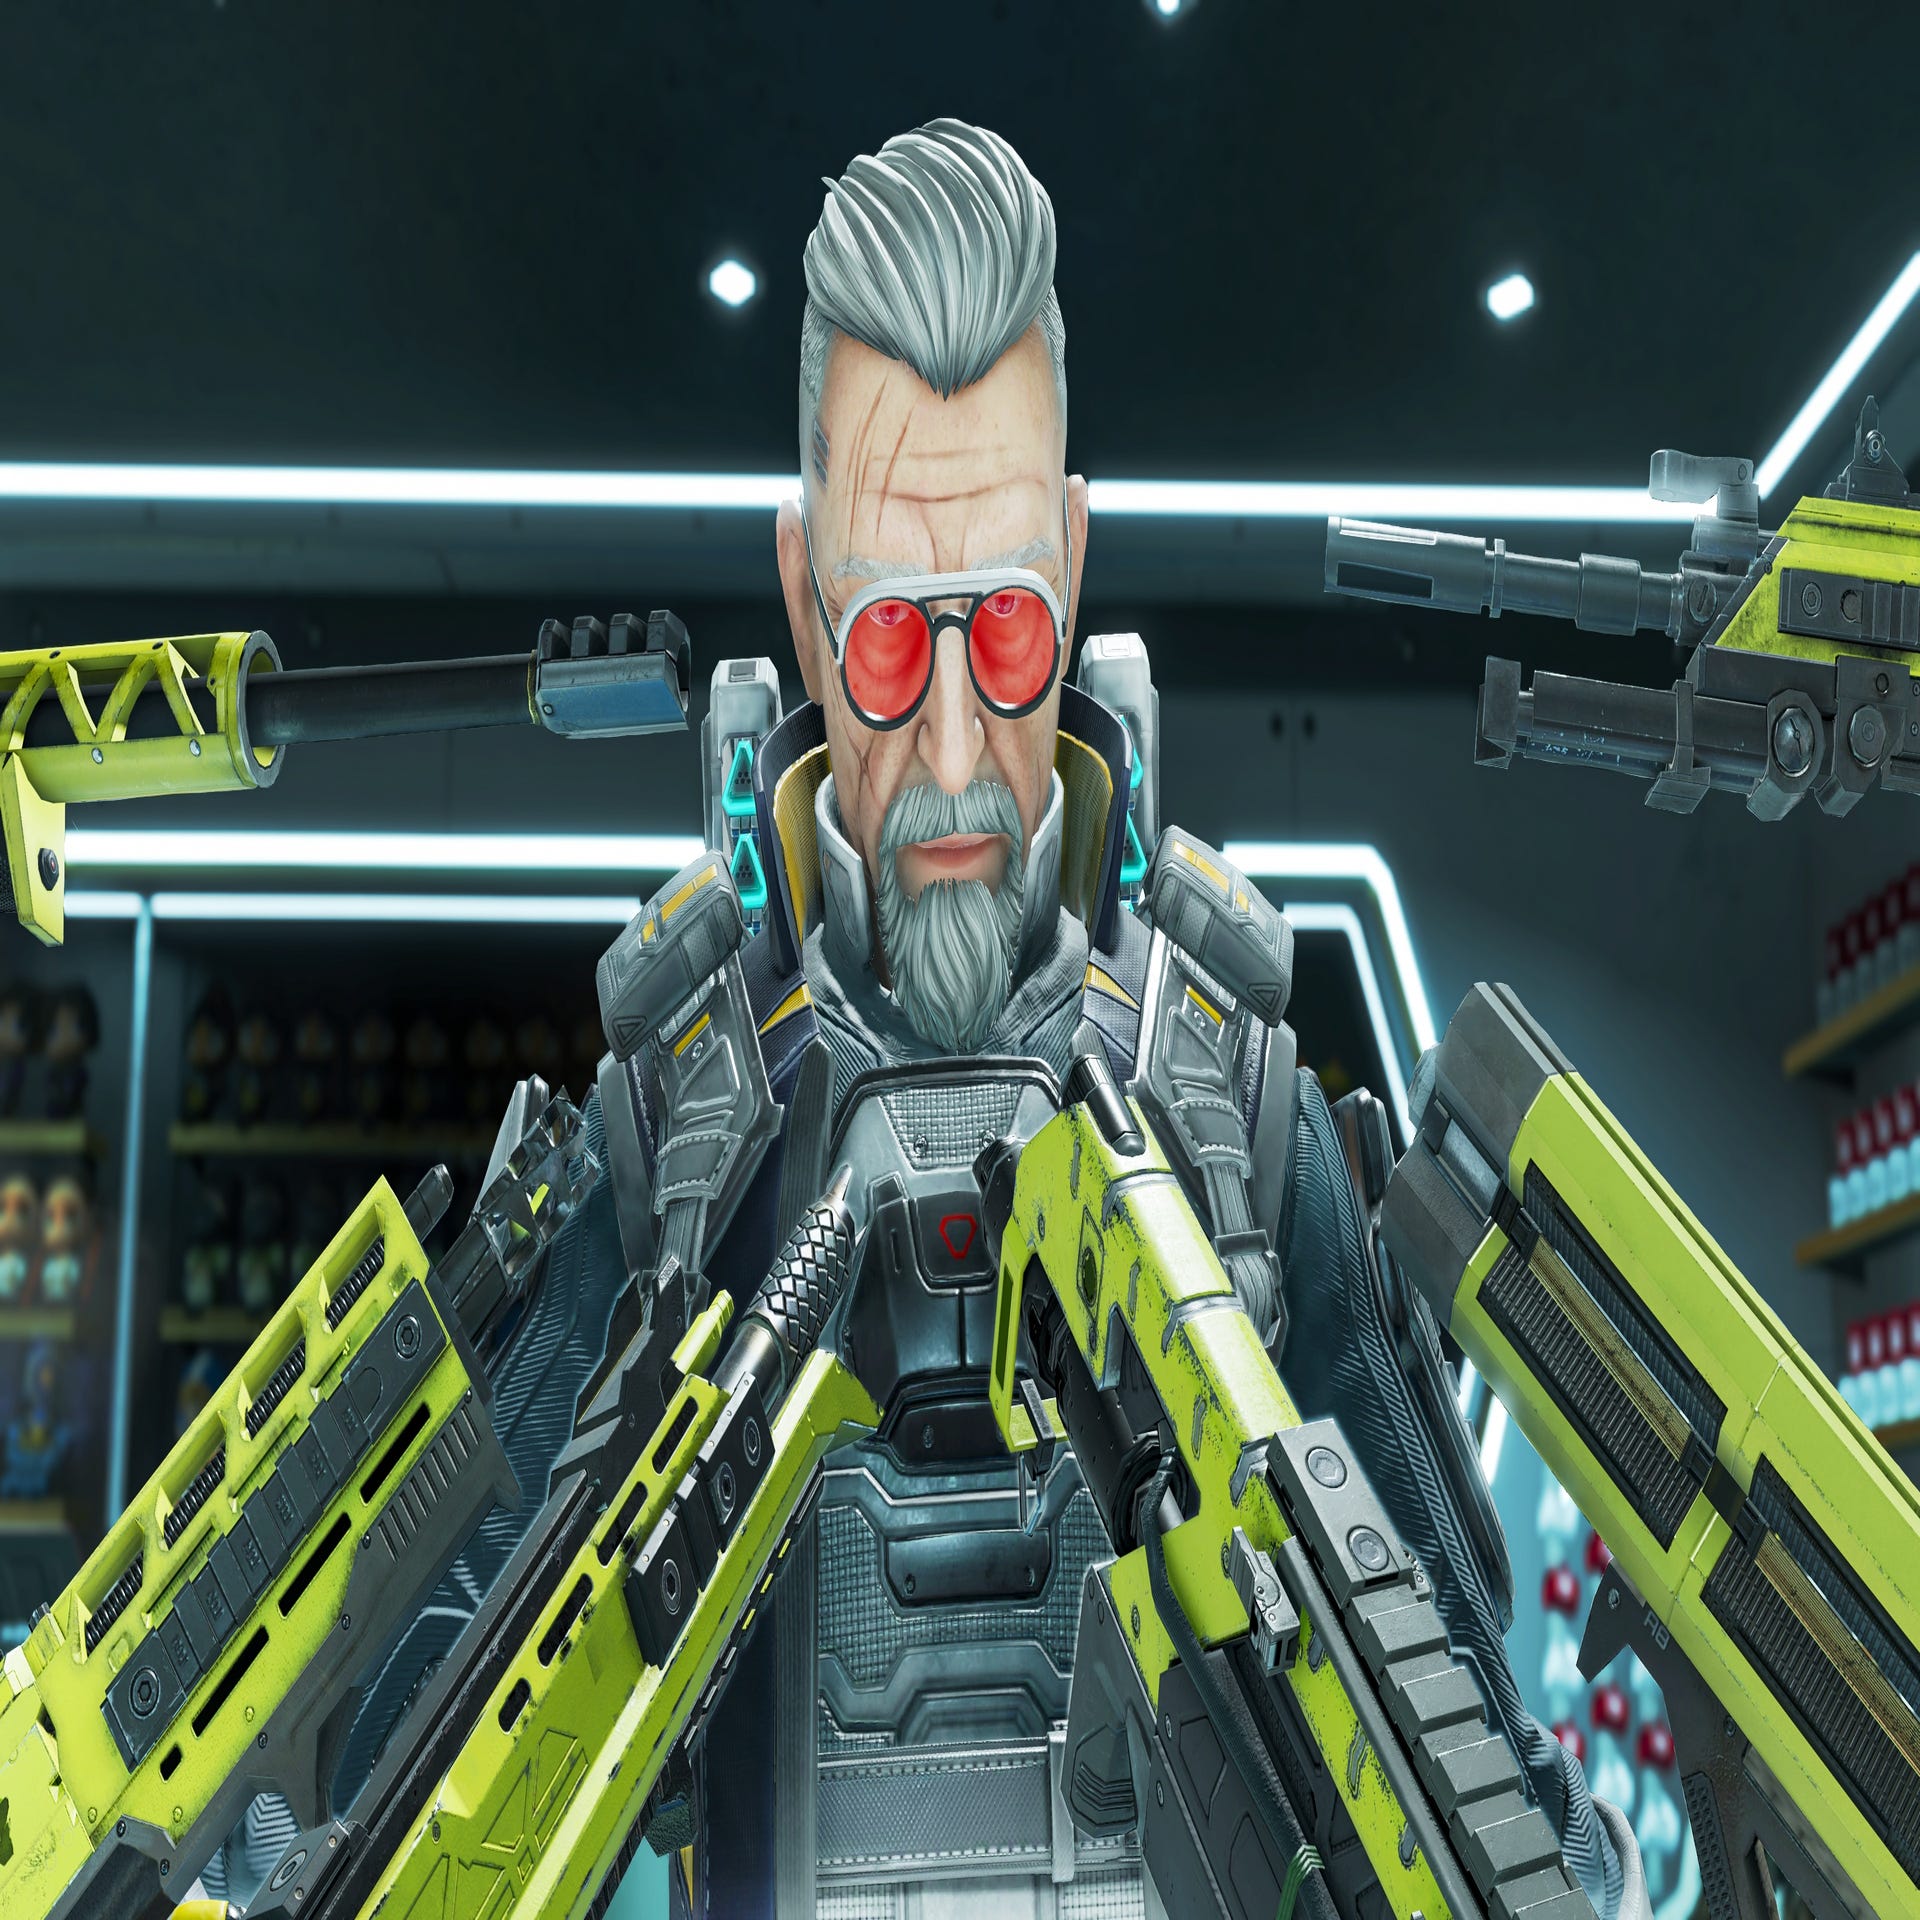 Apex Legends' latest character Ballistic is an old dog showing off some